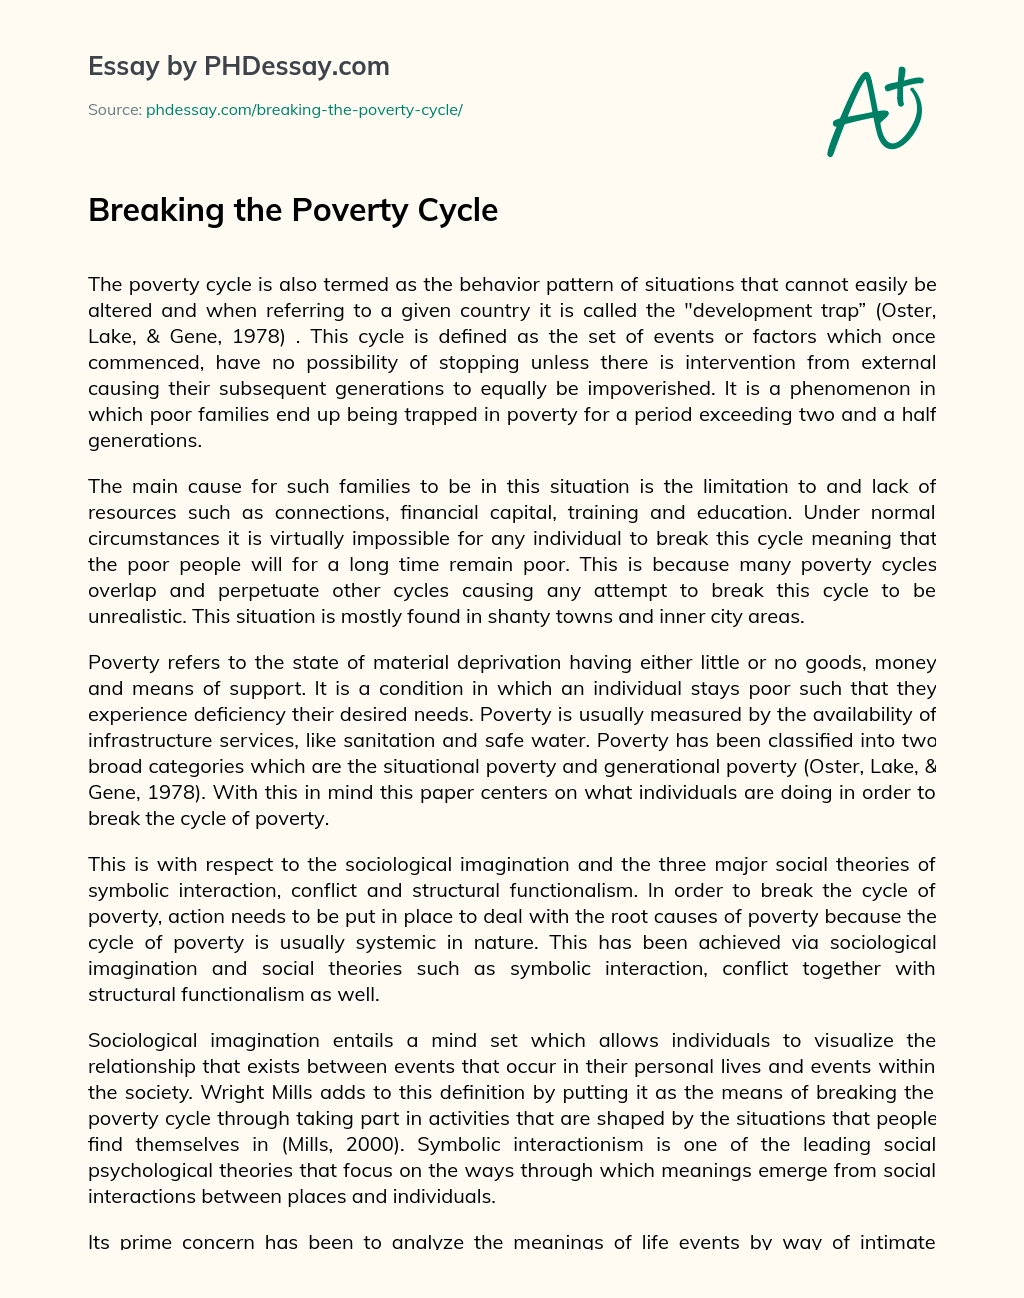 Breaking the Poverty Cycle essay